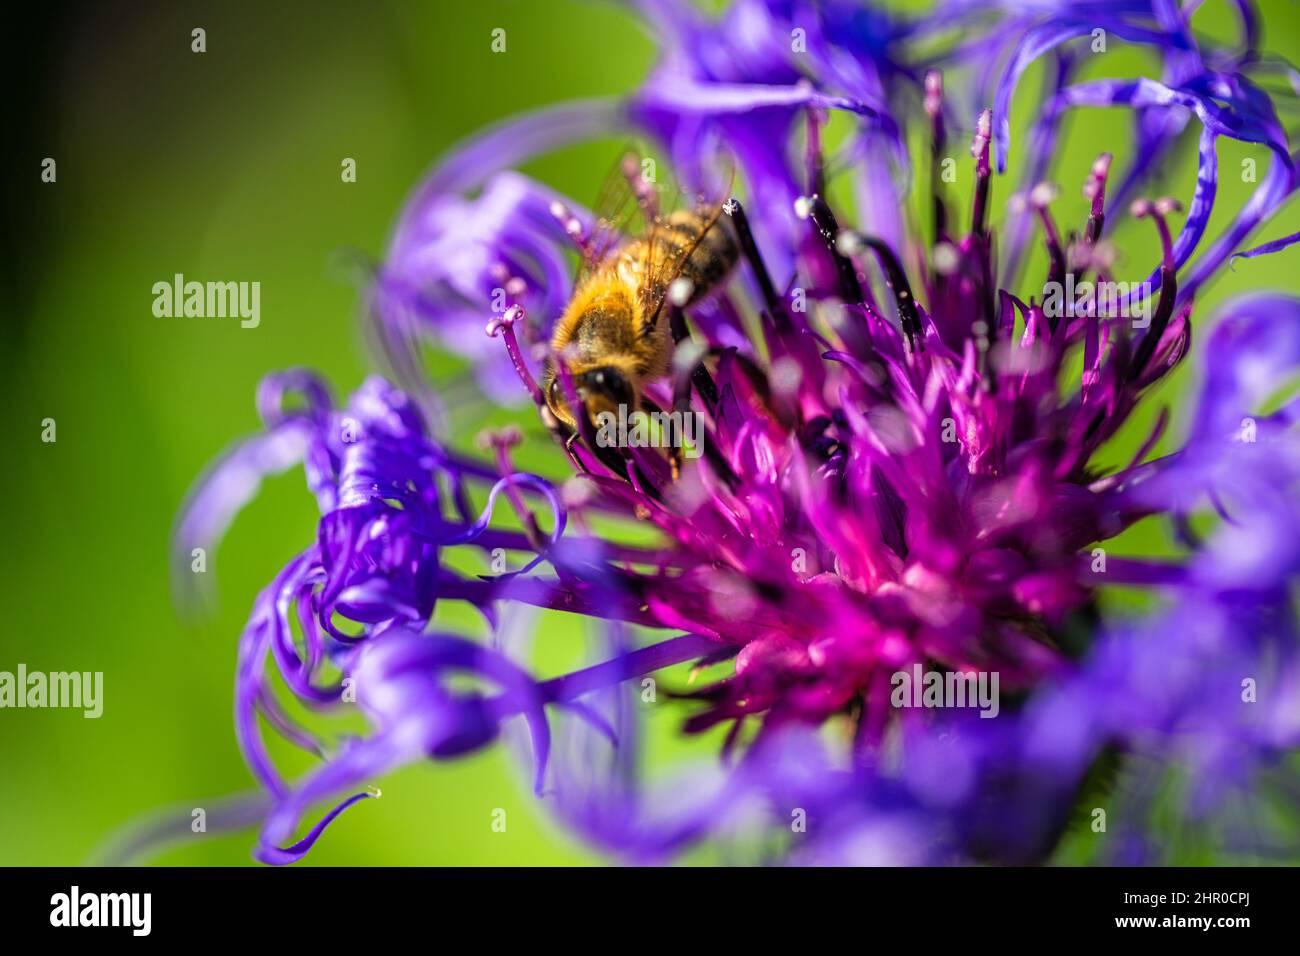 The perennial cornflower, latin name Centaurea montana. Blue-violet flower pollinating by a bee. Stock Photo